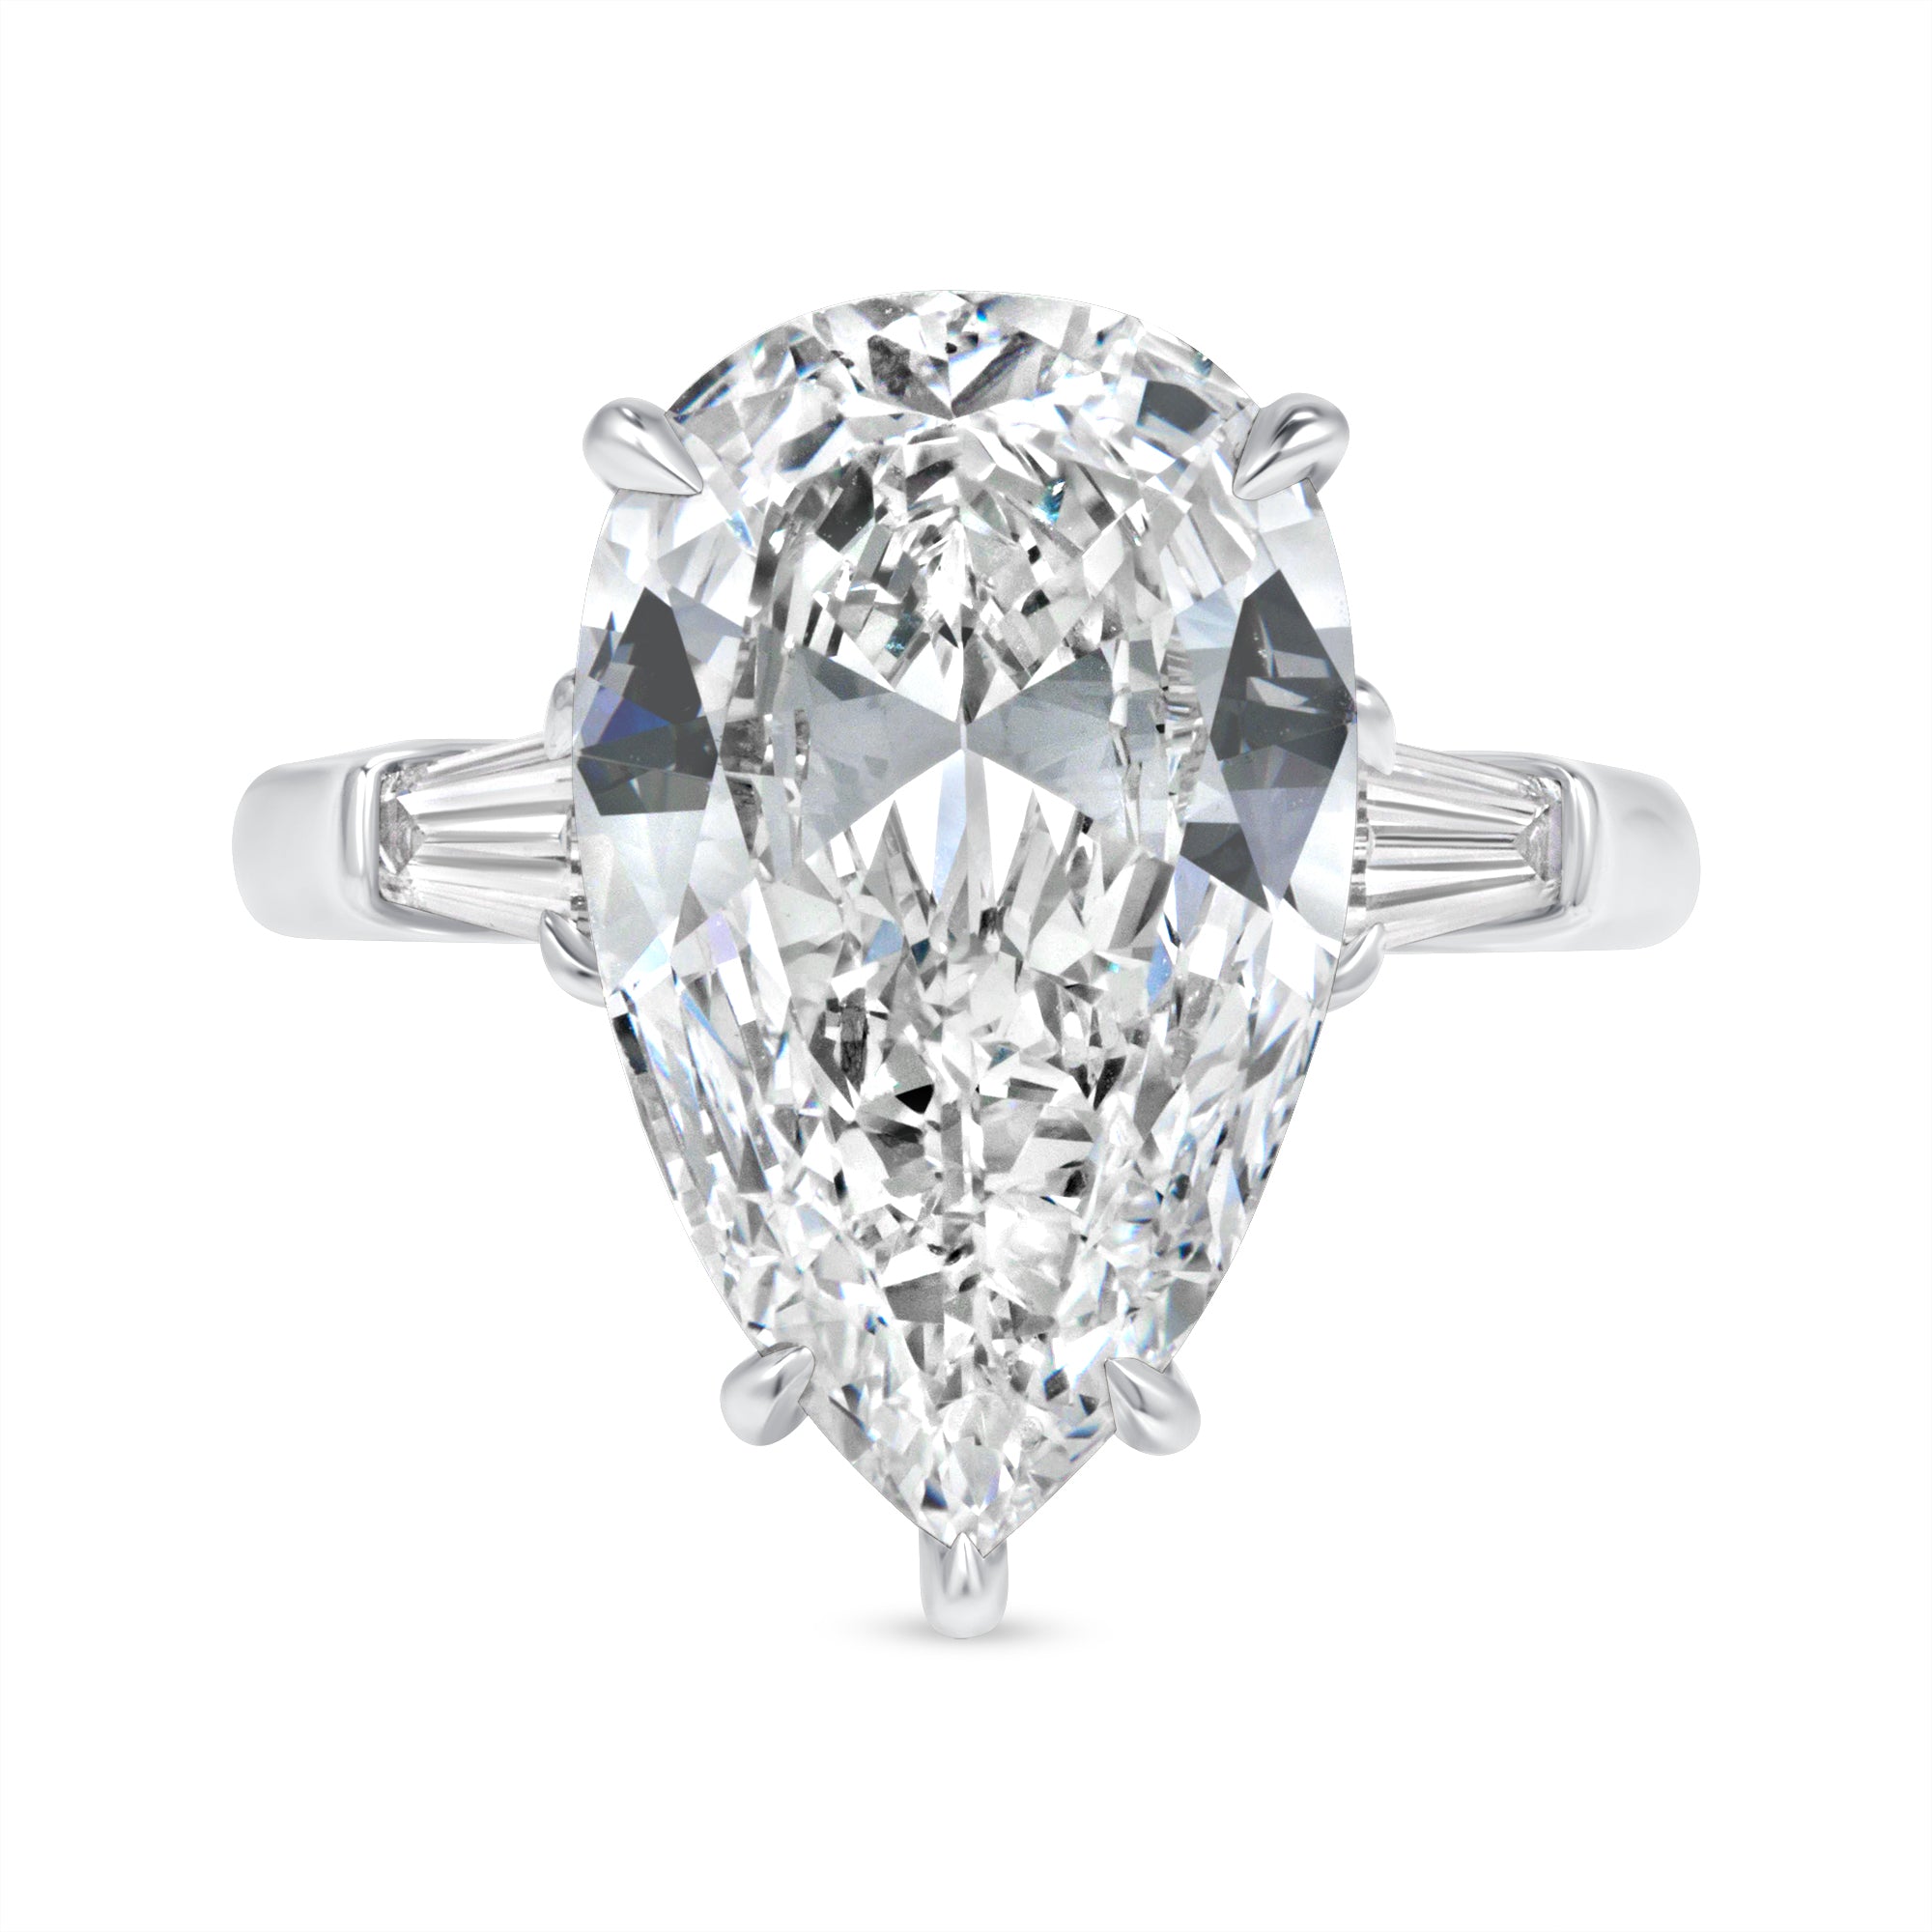 4.94ct Pear Cut Diamond with Tapered Baguette Side Stones in Platinum Band, GIA Certified